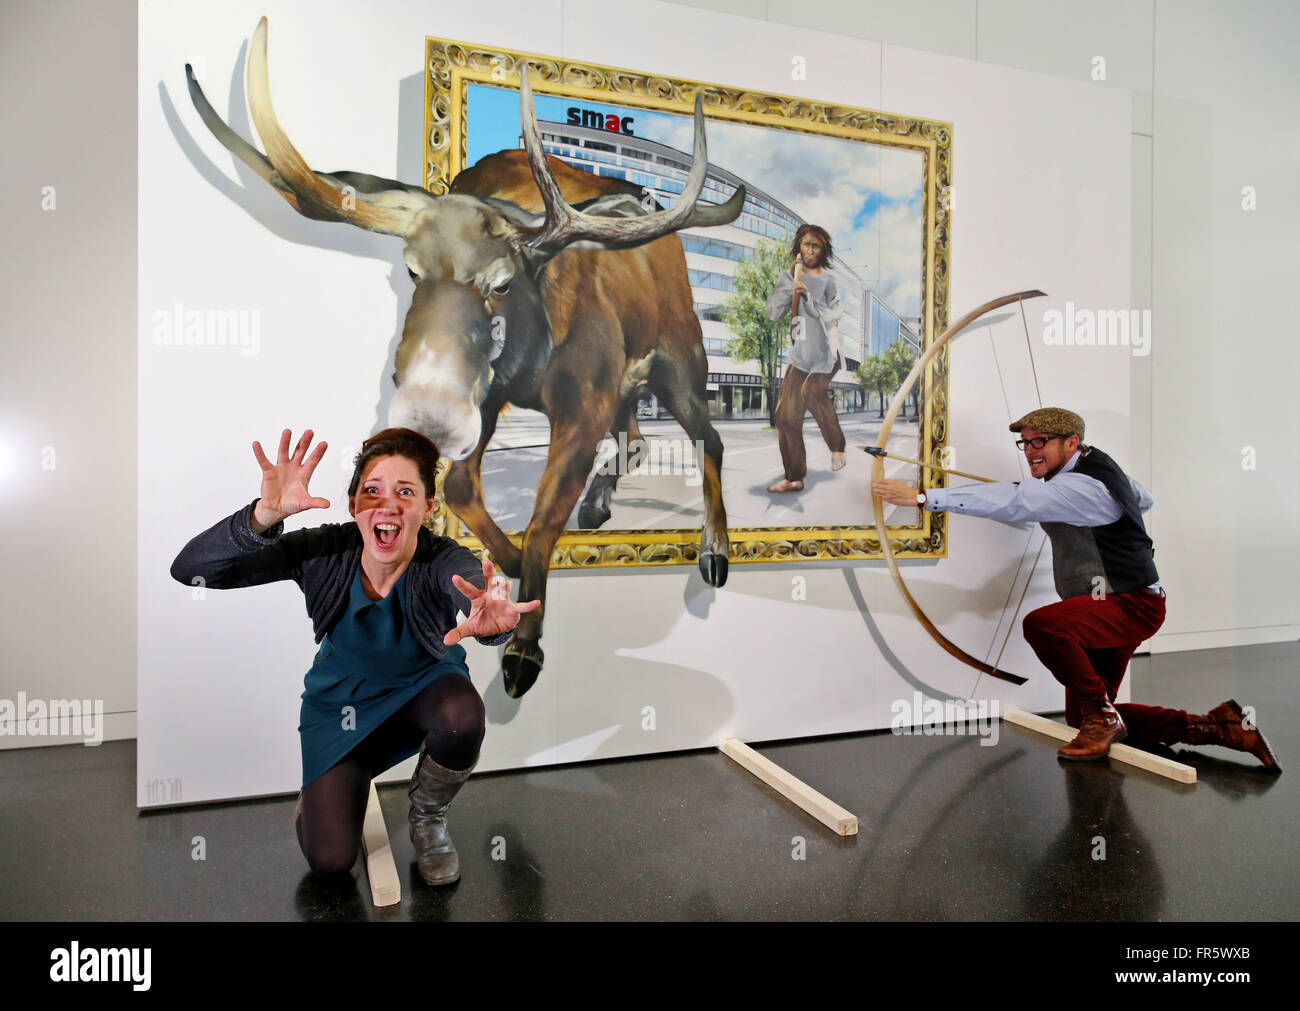 Museum assistant Jutta Boehme and Graffiti artist Tasso (r) testing the effect of a new 3D picture depicting a Stone-Age elk hunt at the Public Museum for Archaeology in Chemnitz, Germany, 21 March 2016. The 3D illusion painting on a mobile 3.6 x 2.5 meter sized surface will be exhibited in the museum in the next two weeks. Afterwards, the painting will go on tour to advertise the archaeology museum. PHoto: Jan Woitas/dpa Stock Photo